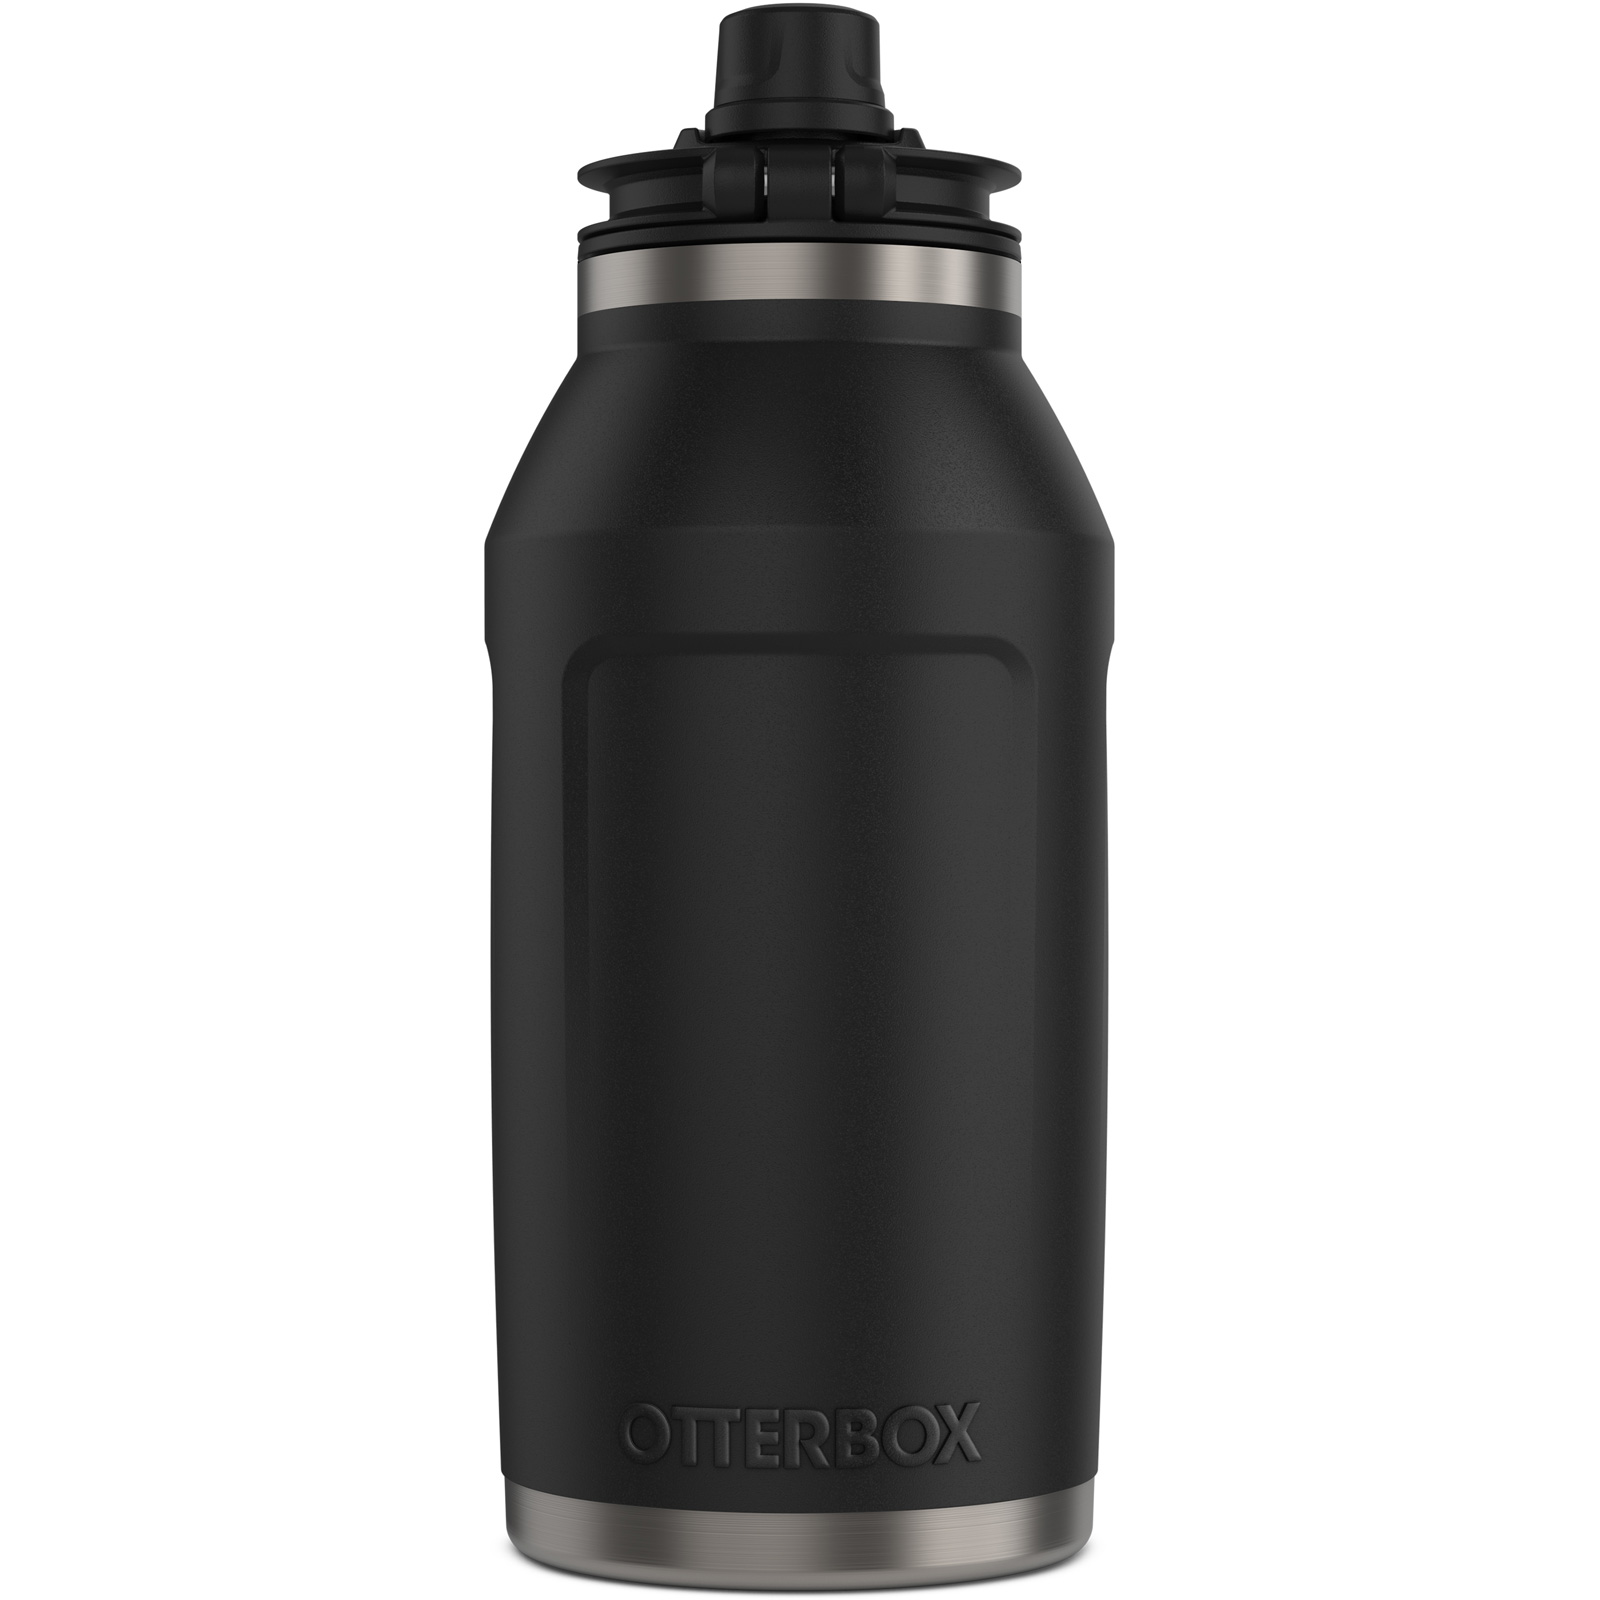 OtterBox growlers and tumblers are under $20 on Woot!